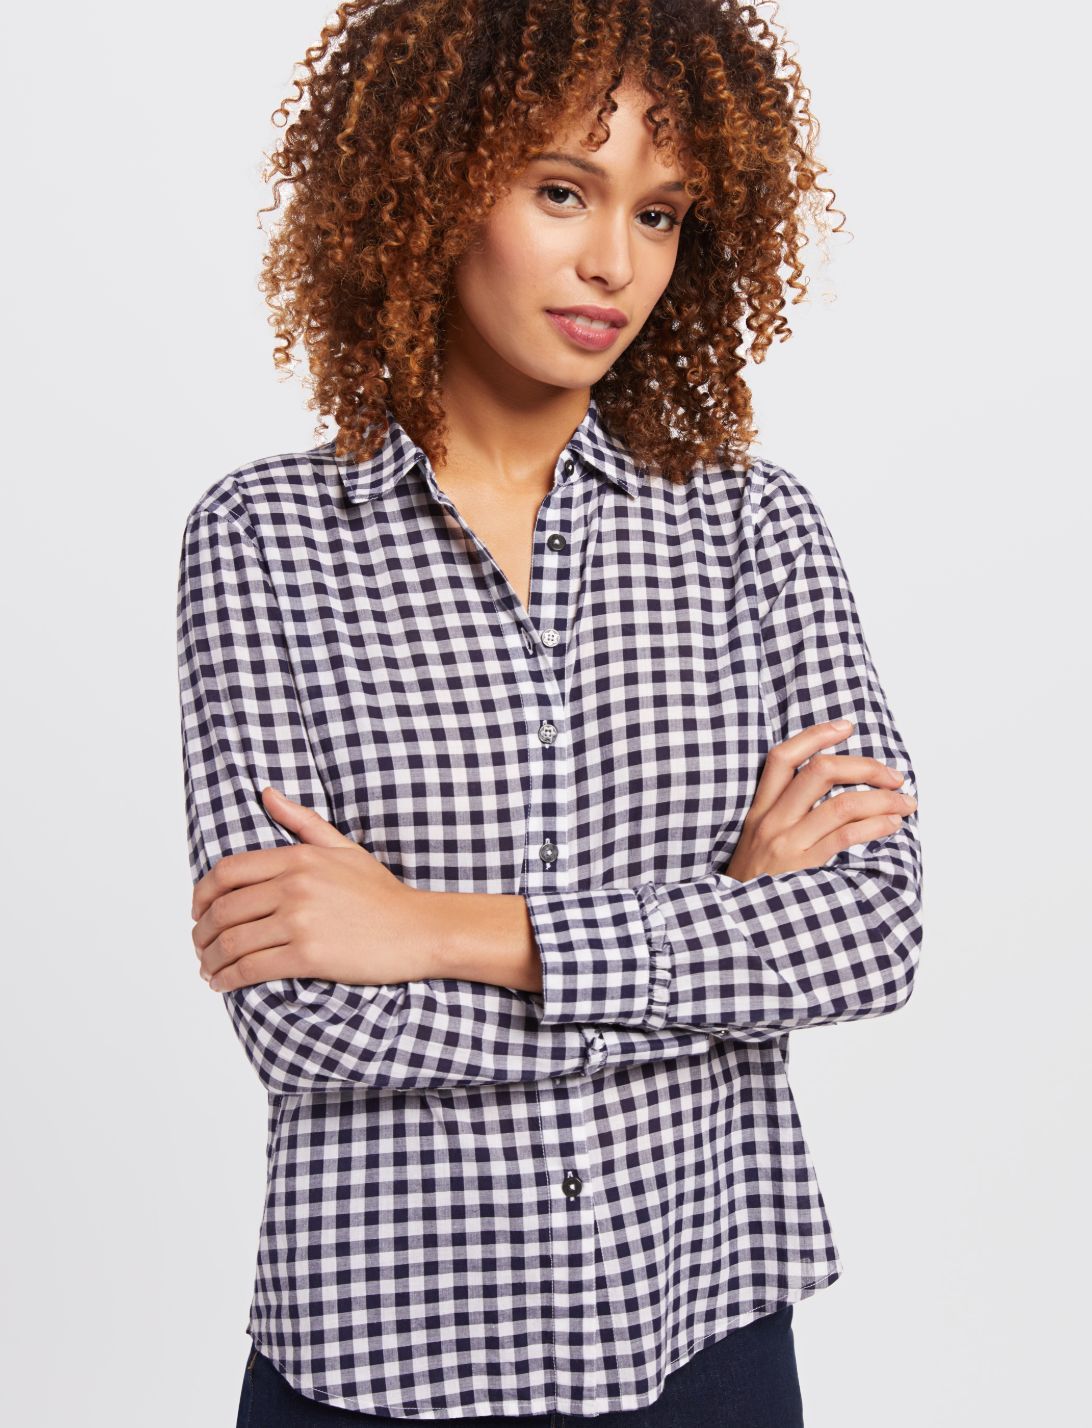 J.Crew Gingham Pants + Cute Gingham Finds - Kelly in the City